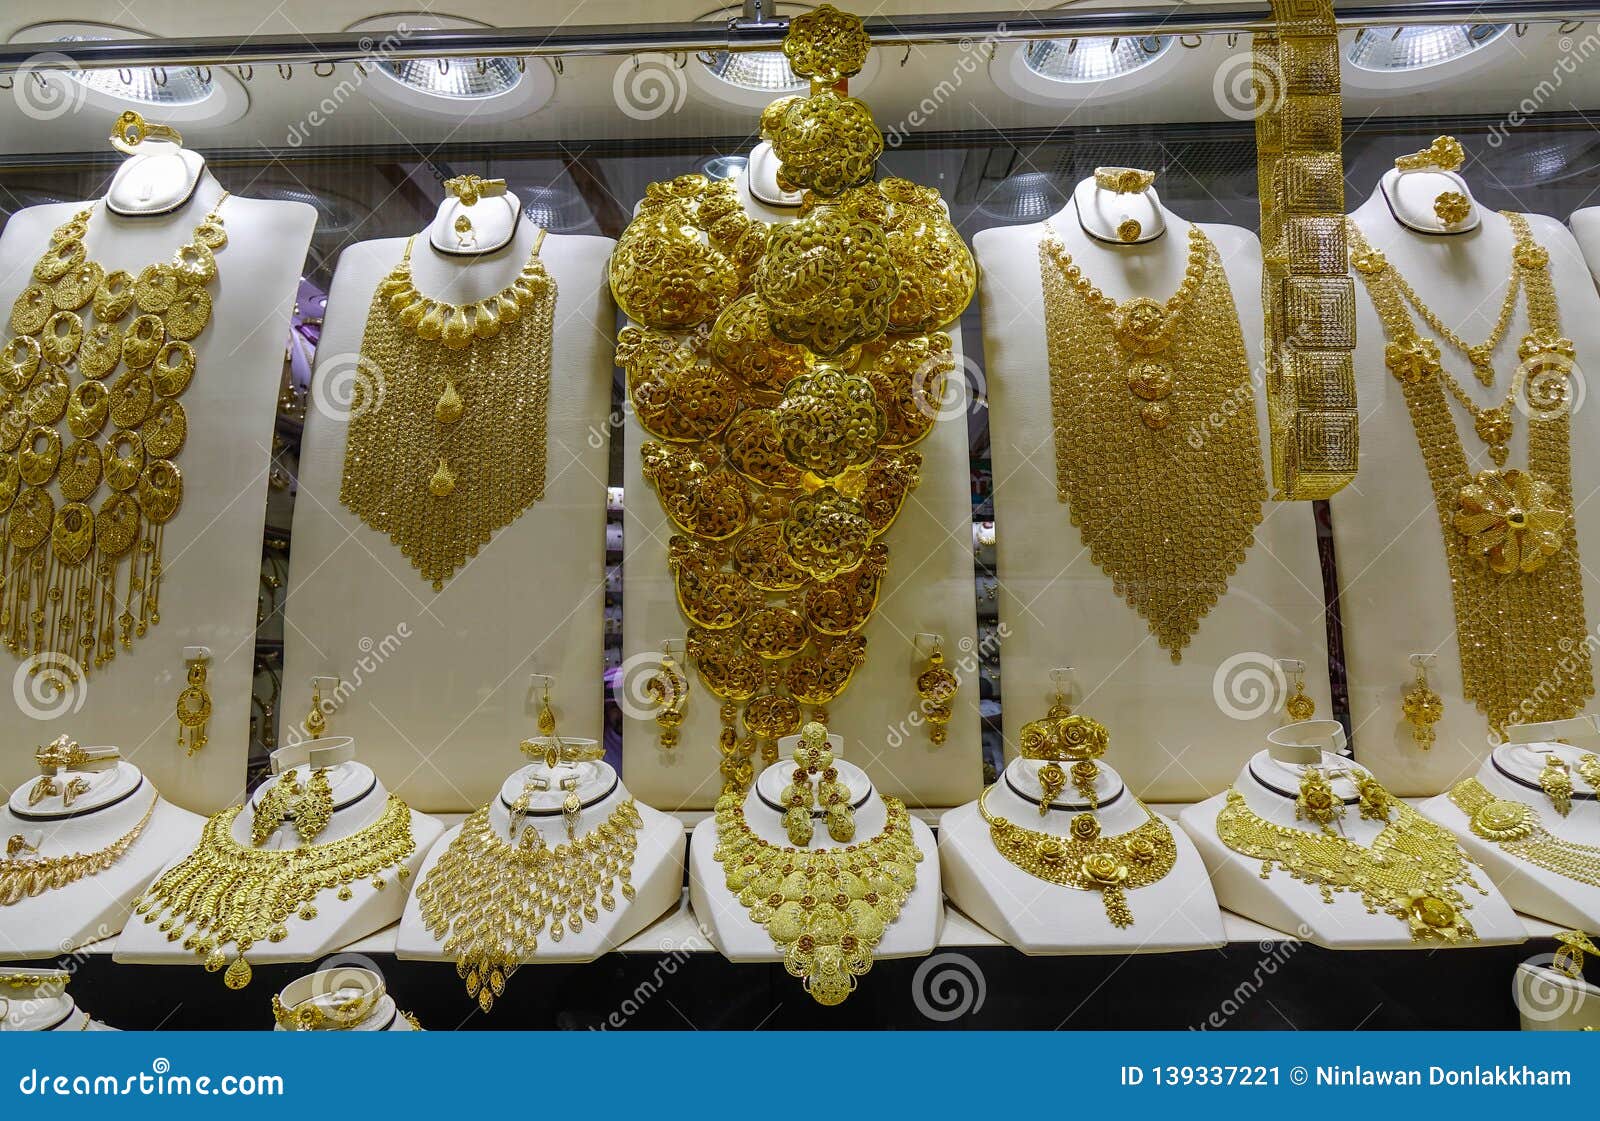 Gold Jewelry in the Display Window Stock Image - Image of beauty ...